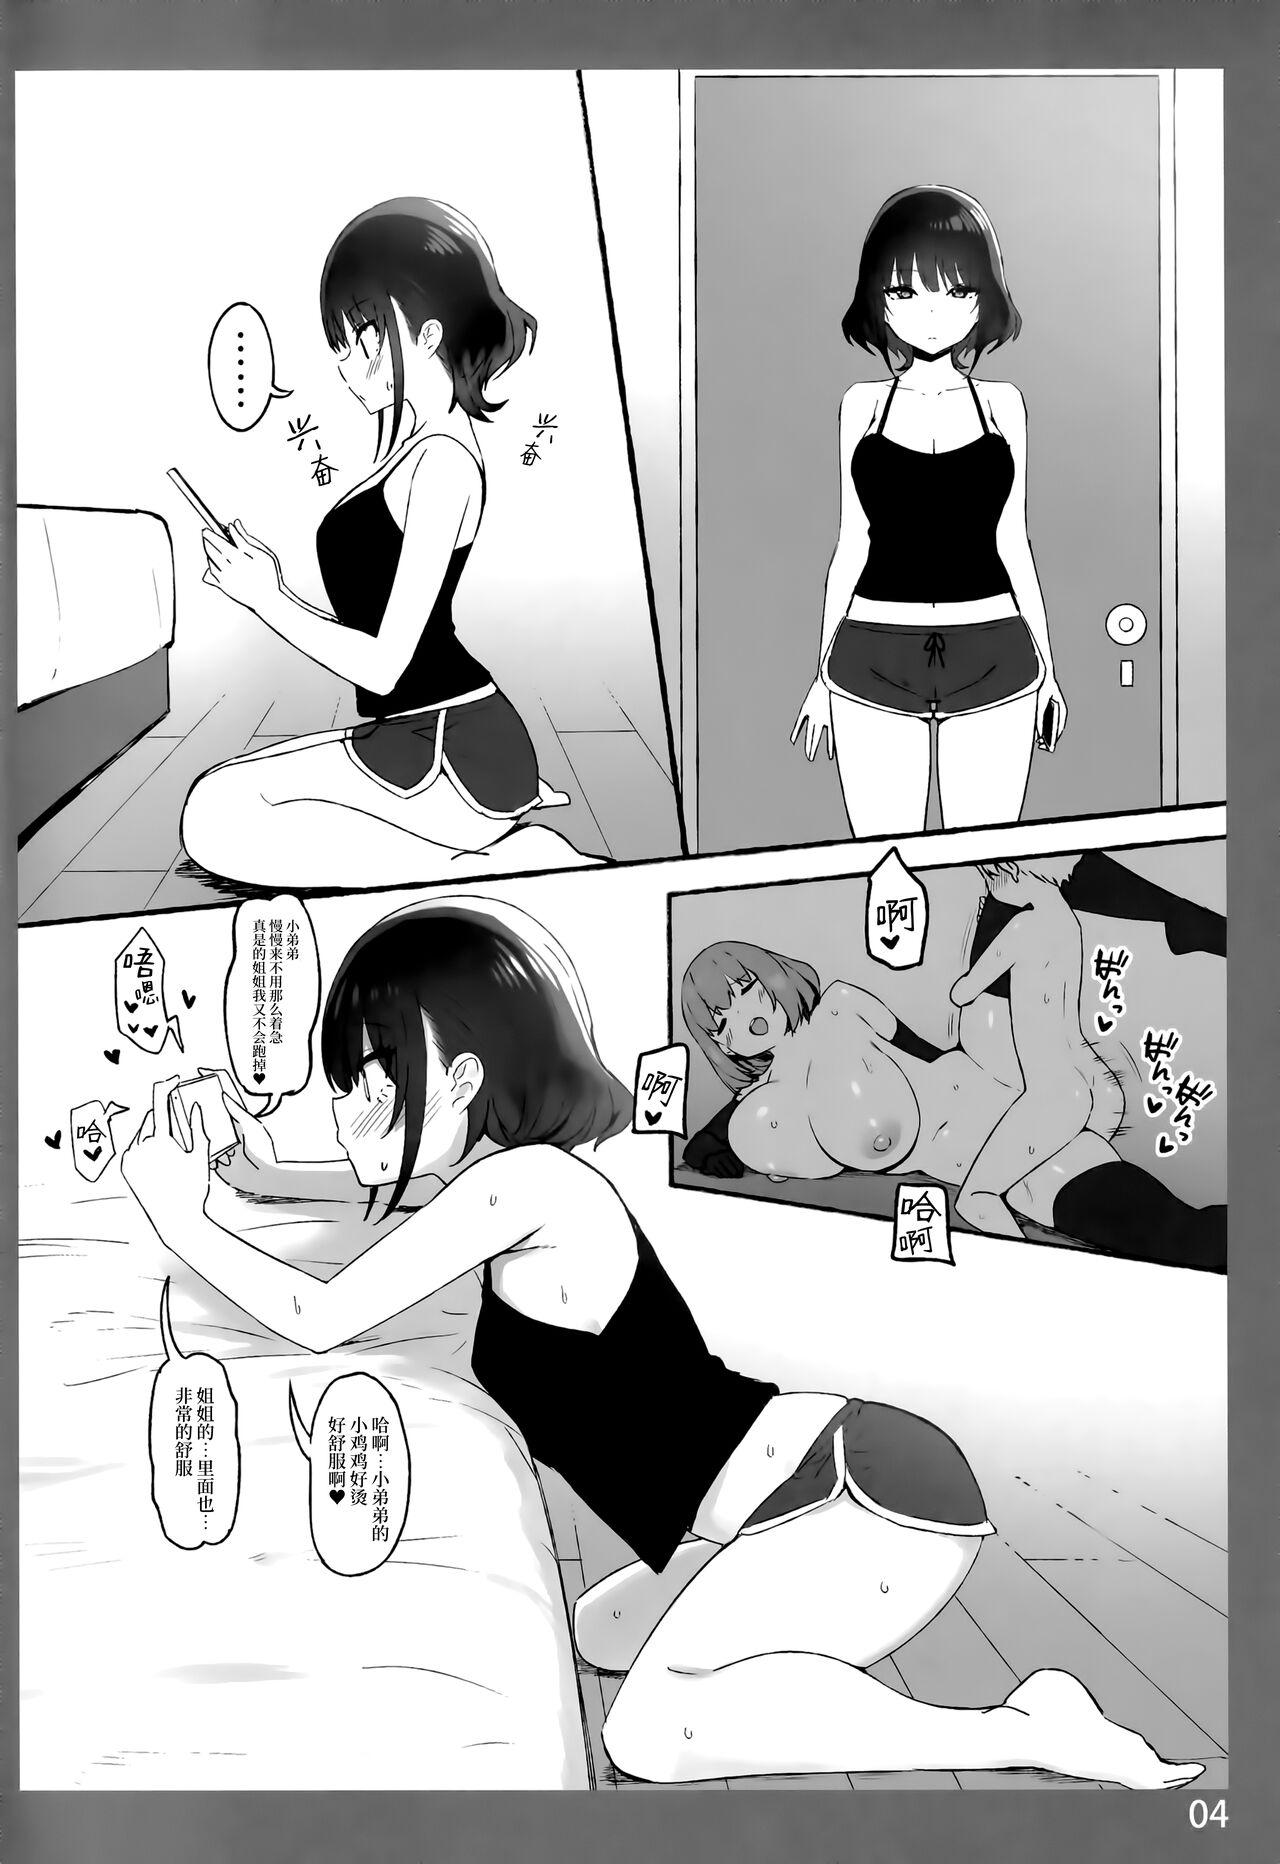 Tetas [Candy Club (Sky)] Onee-chan to Torokeru Kimochi SP | The Melting Feeling with Onee-chan SP [Chinese] [白杨汉化组] - Original Sexo - Page 3